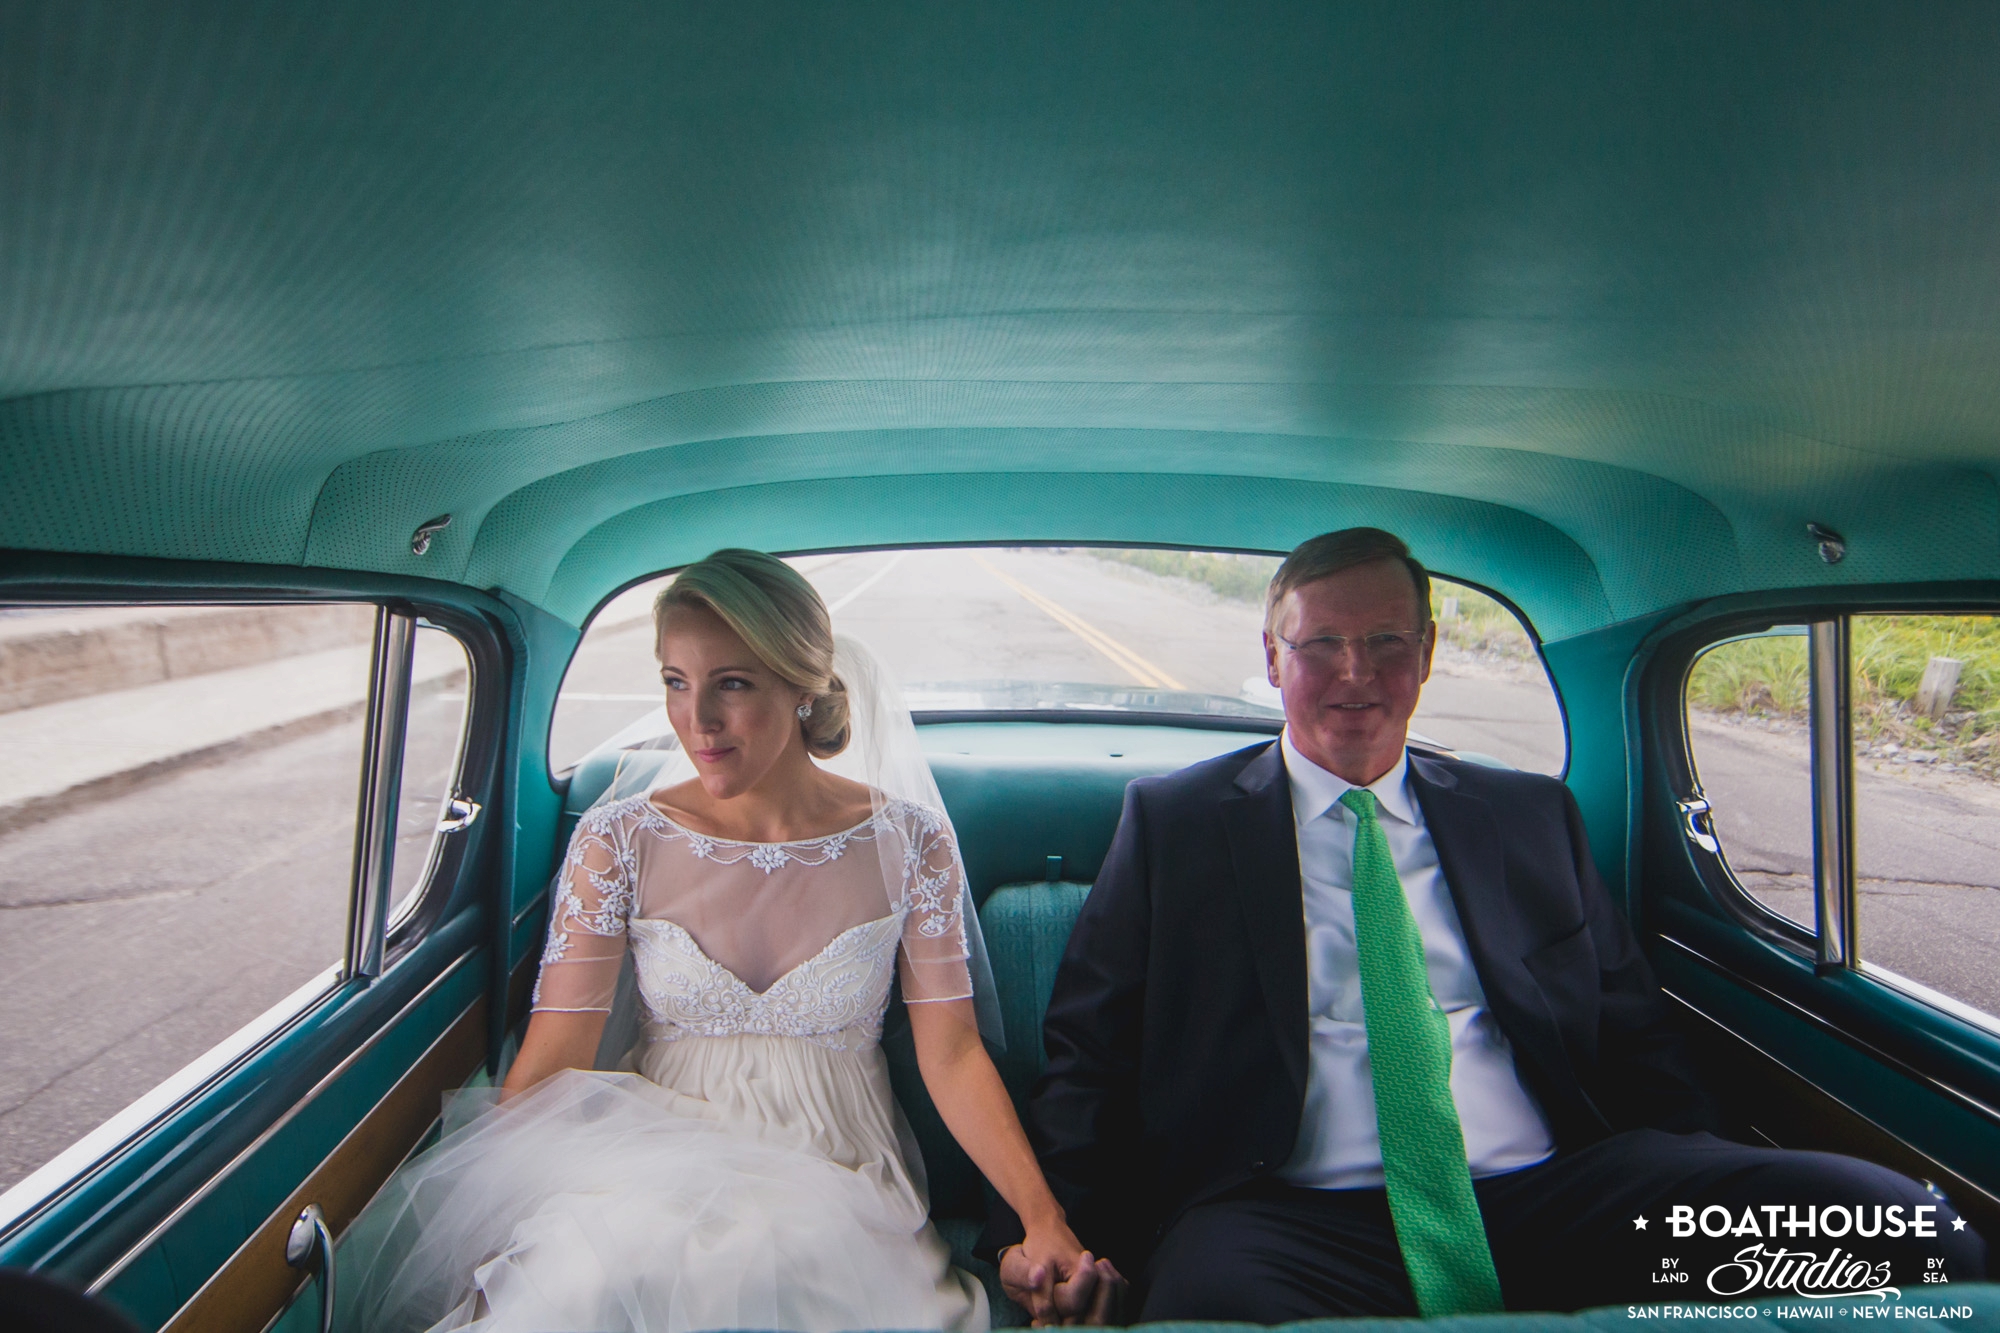 Quiet moment in the antique car driving to the wedding ceremony.